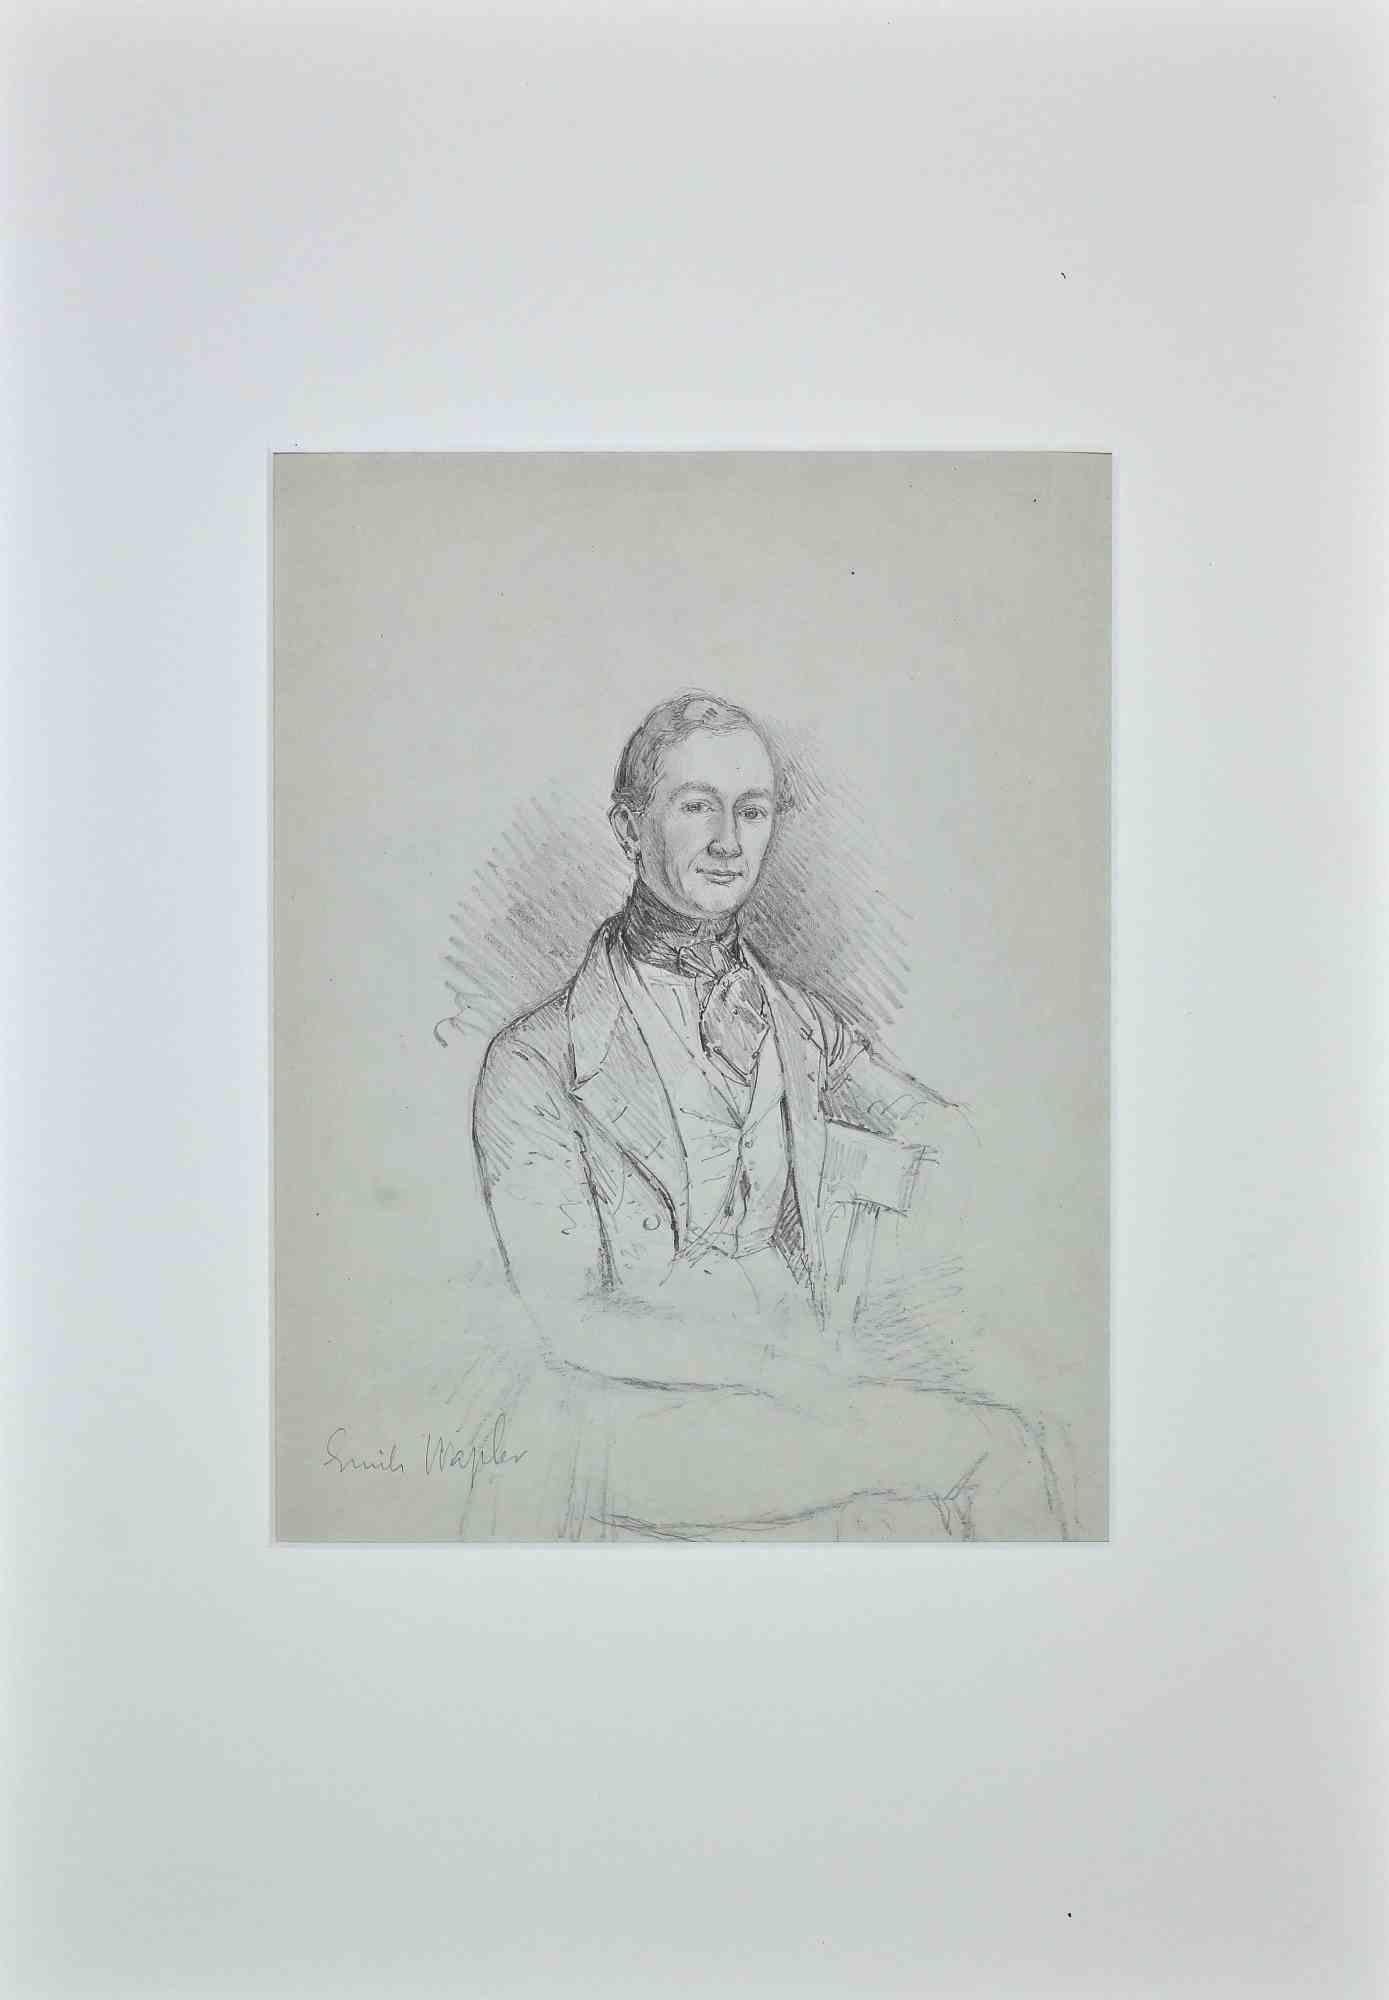 Portrait of a Man - Original Pencil Drawing - Late 19th Century